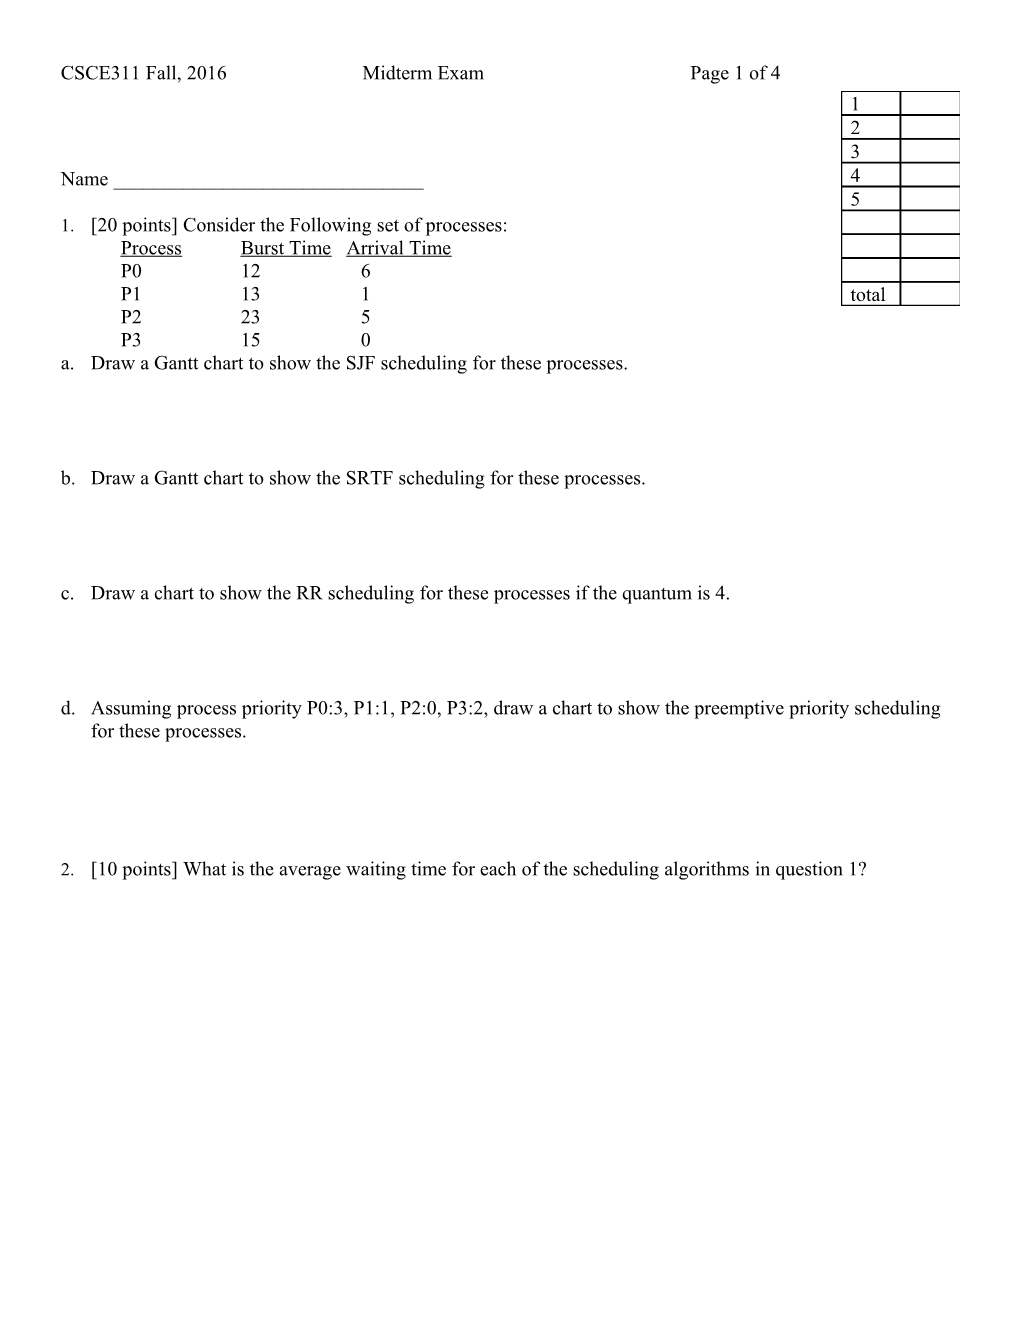 CSCE311 Fall, 2016Midterm Exampage 1 of 4